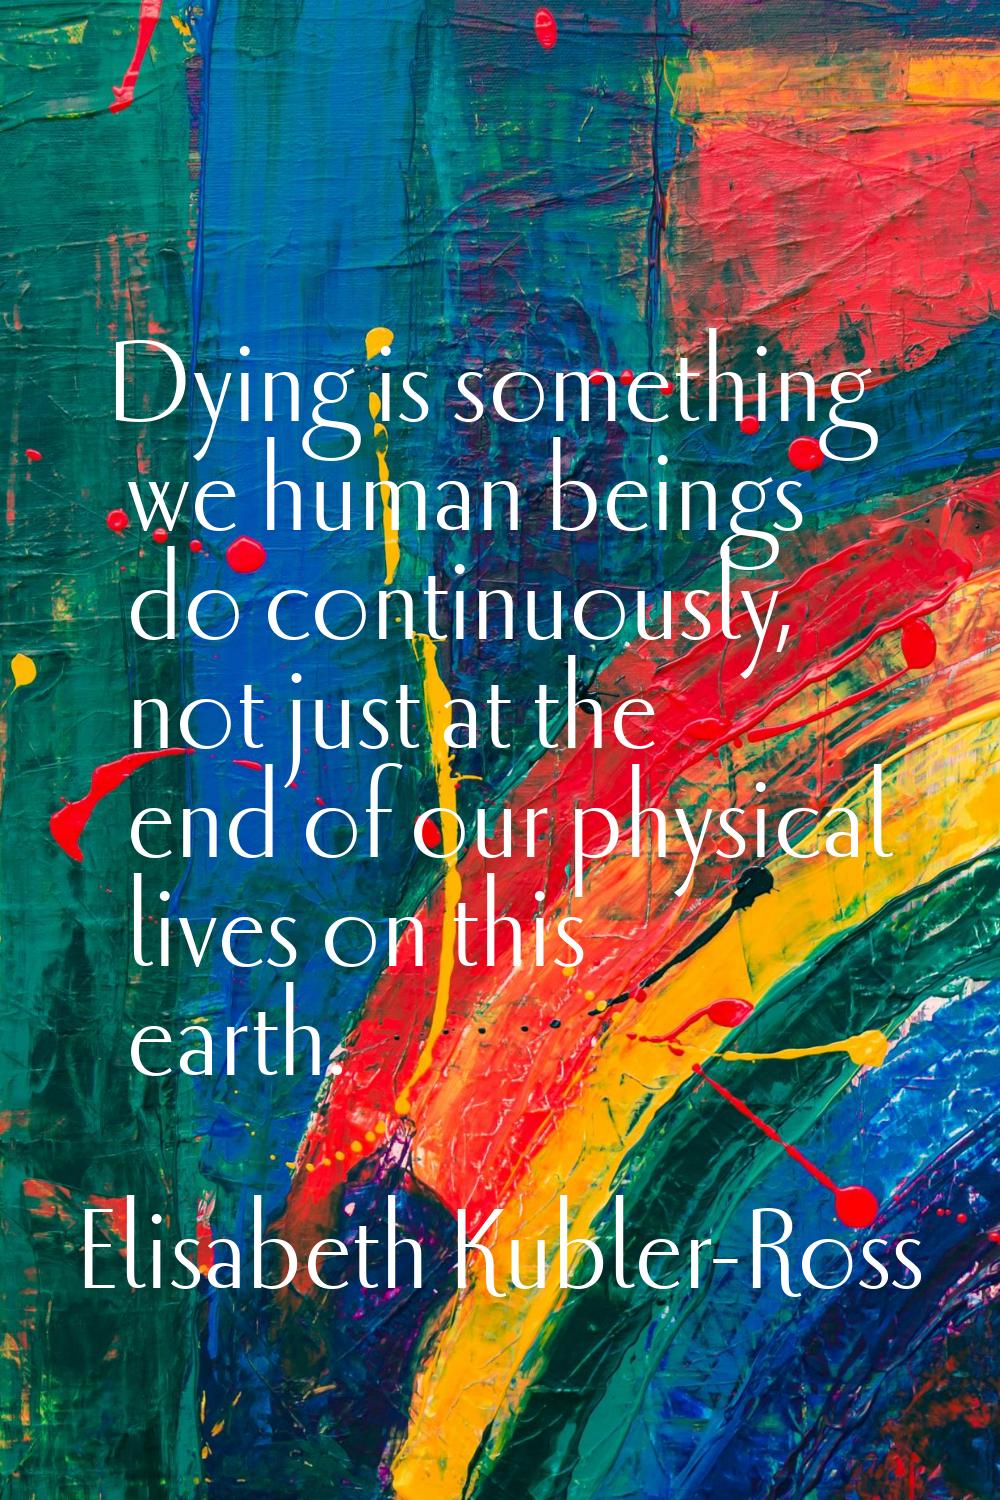 Dying is something we human beings do continuously, not just at the end of our physical lives on th